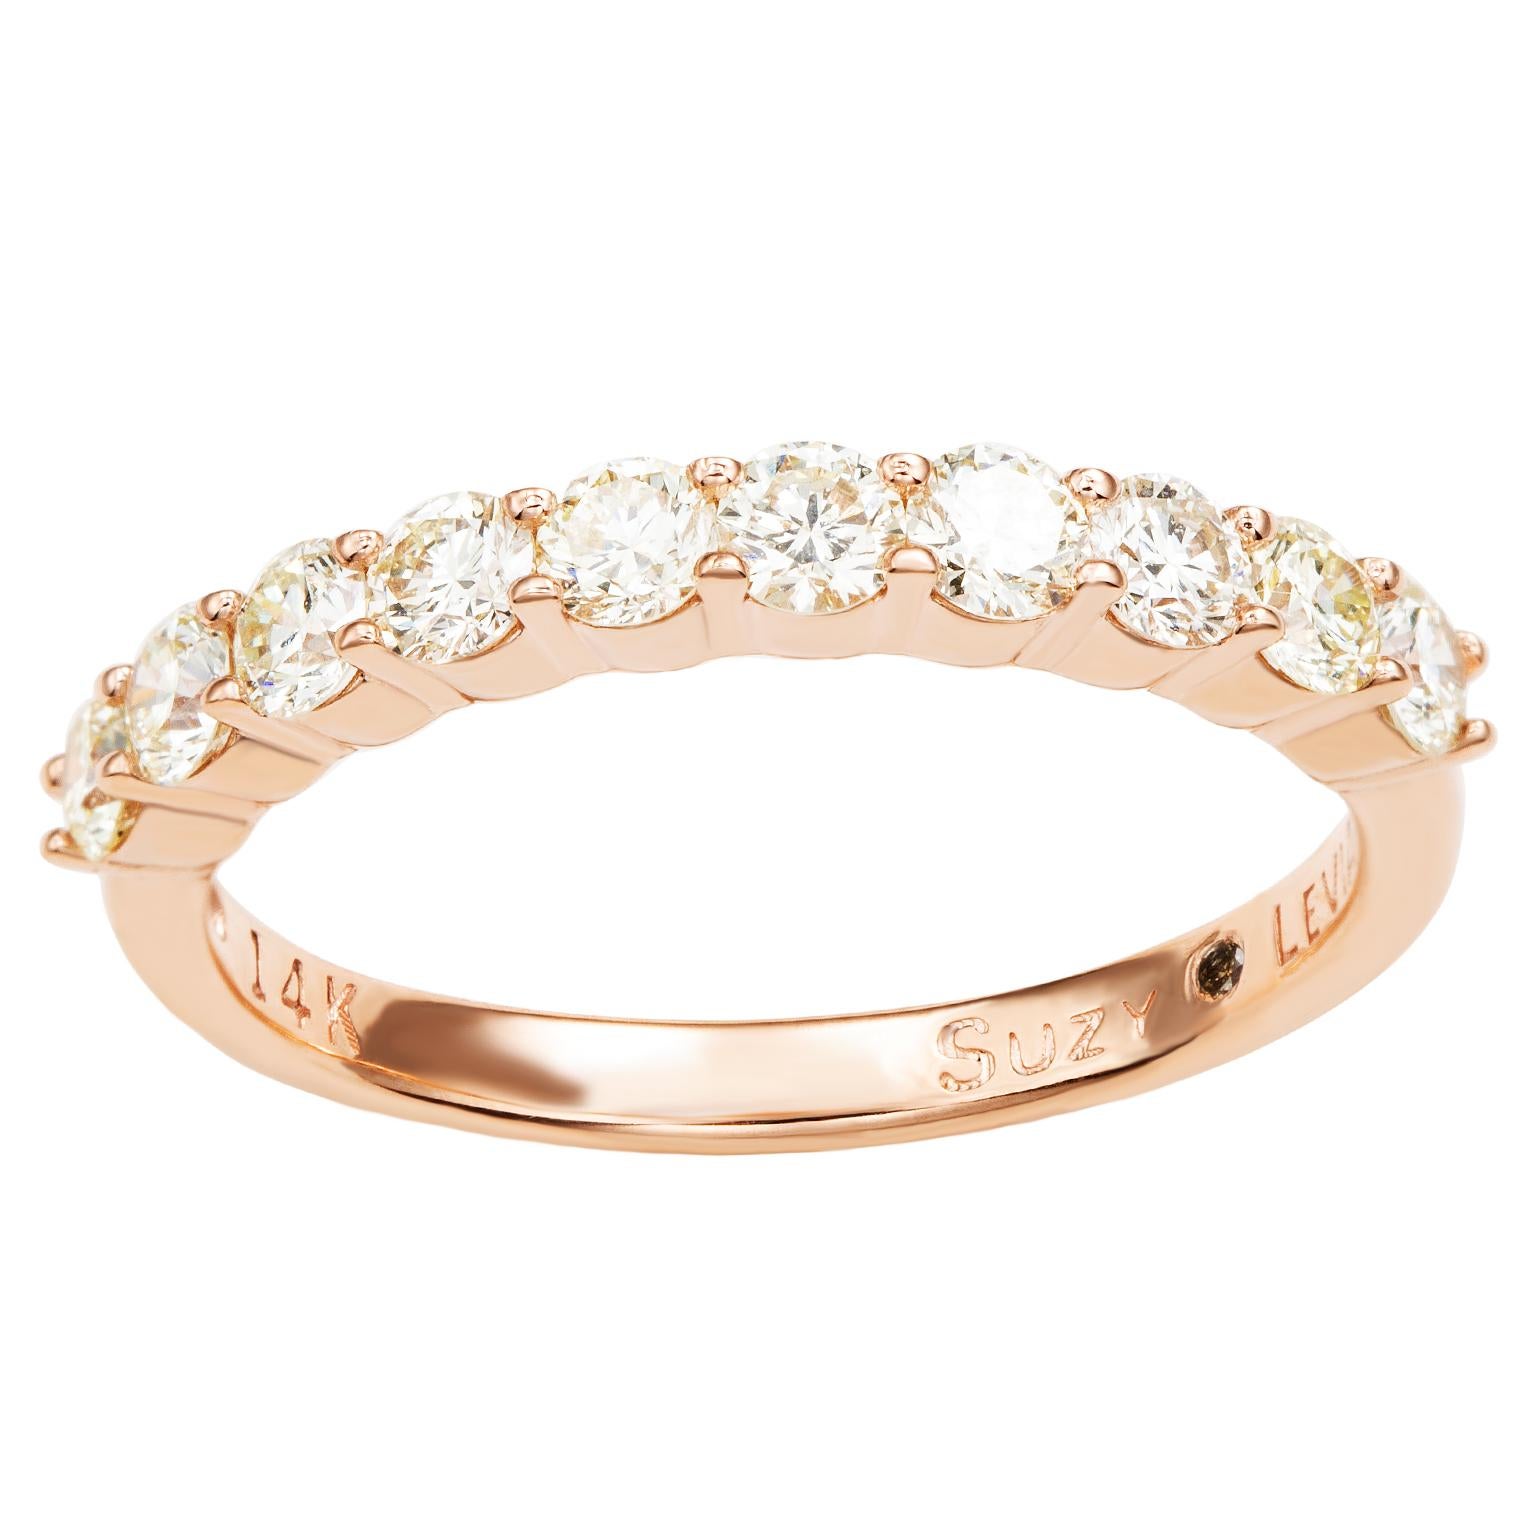 This elegant Suzy Levian diamond half eternity band features a total of ten round cut diamonds (G-H, S1-S2). The diamonds sparkle along half the eternity band, for a sparkle you can't miss with a comfort fit. Designed by Suzy Levian , this 14k rose